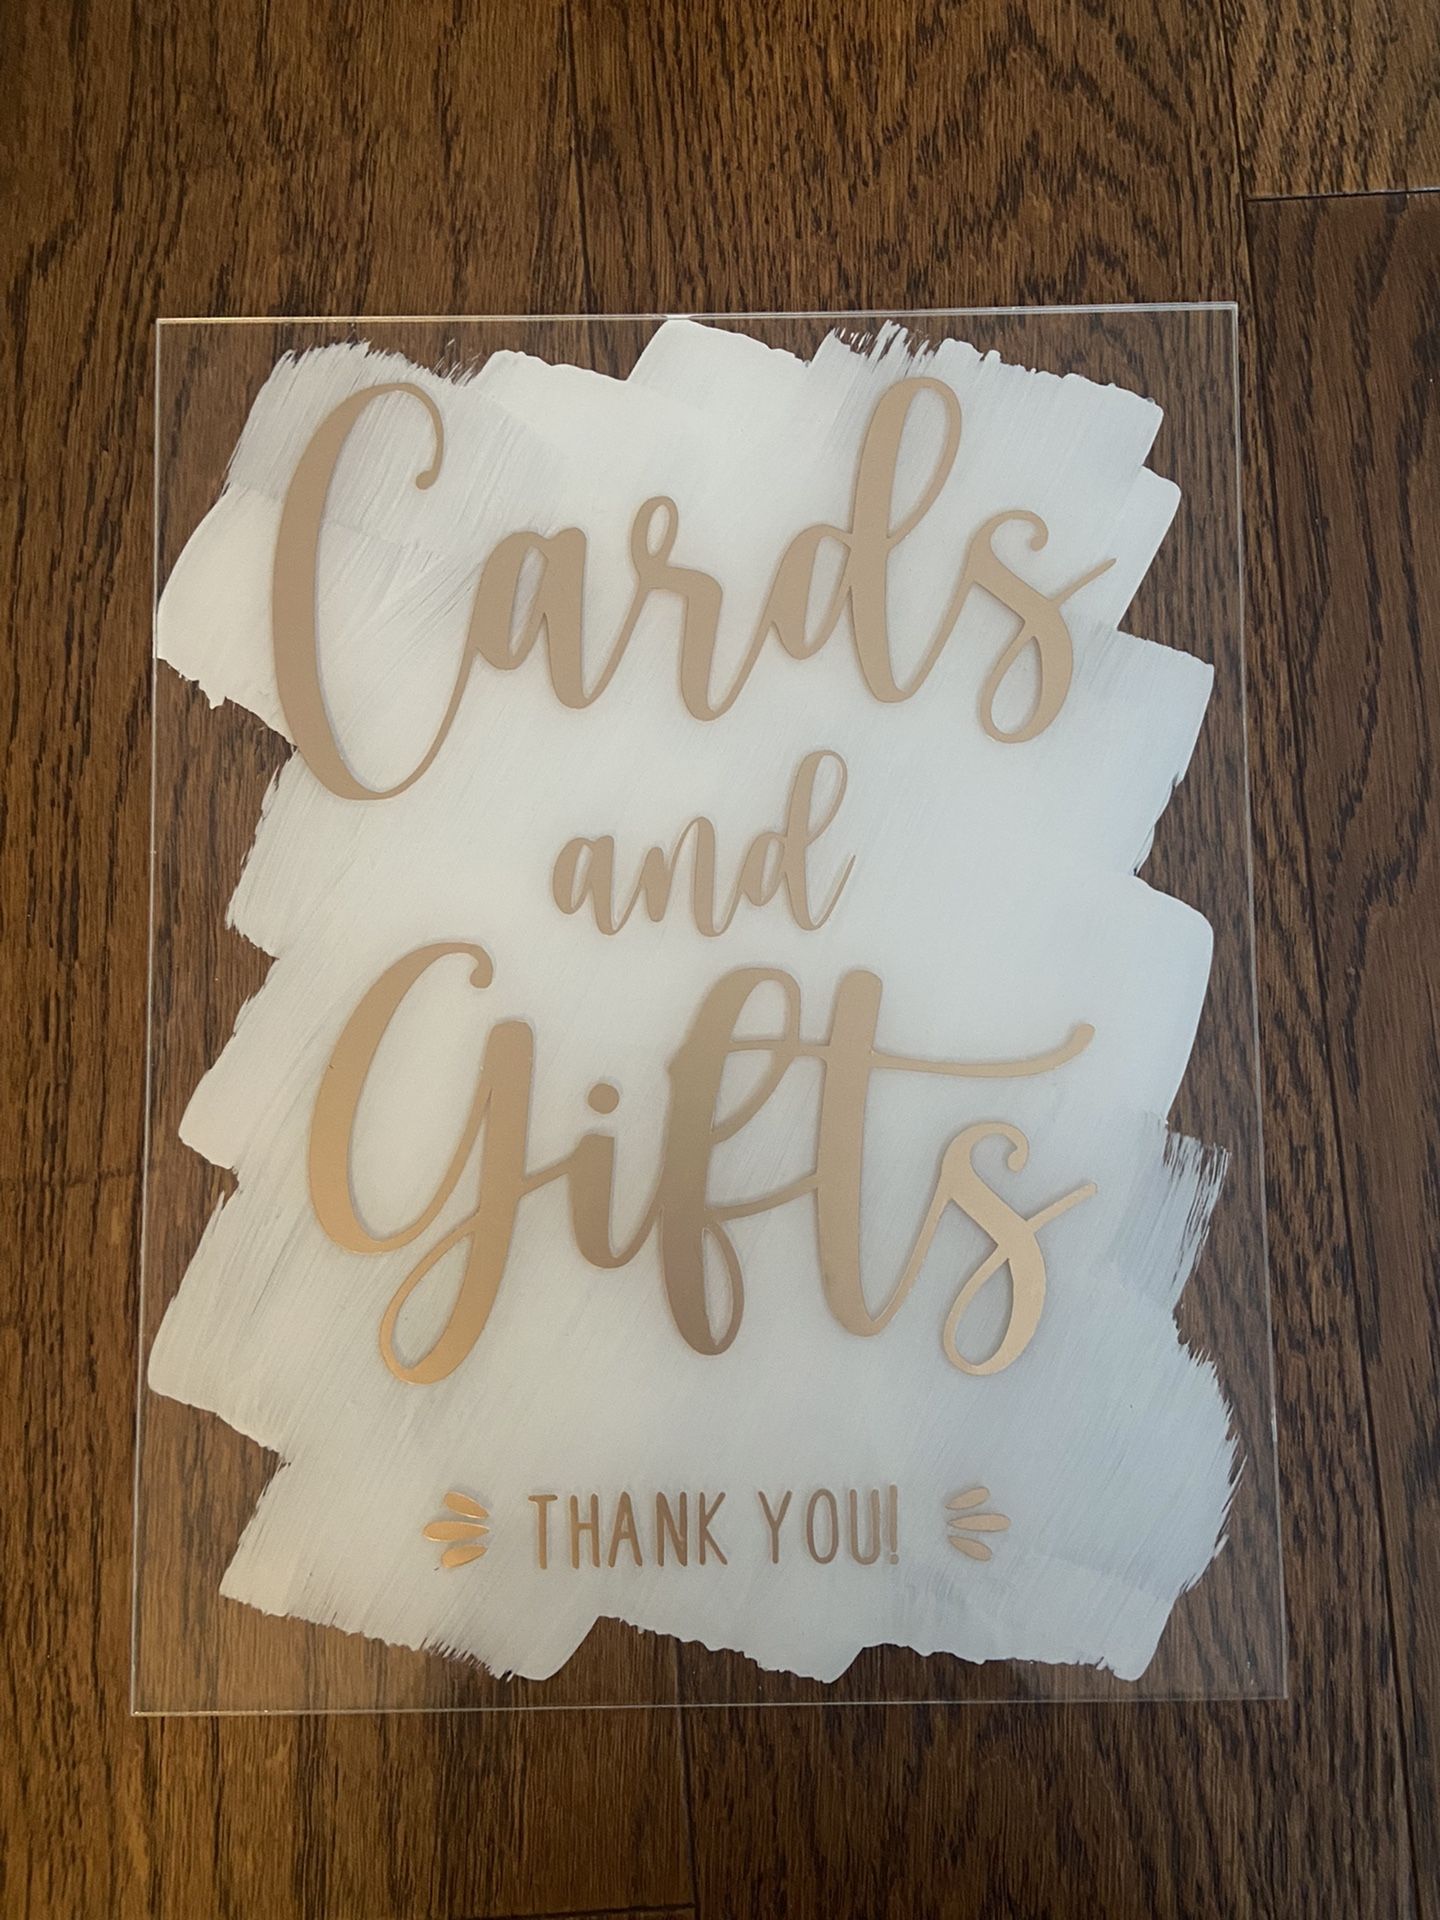 Cards & Gift Wedding Sign 